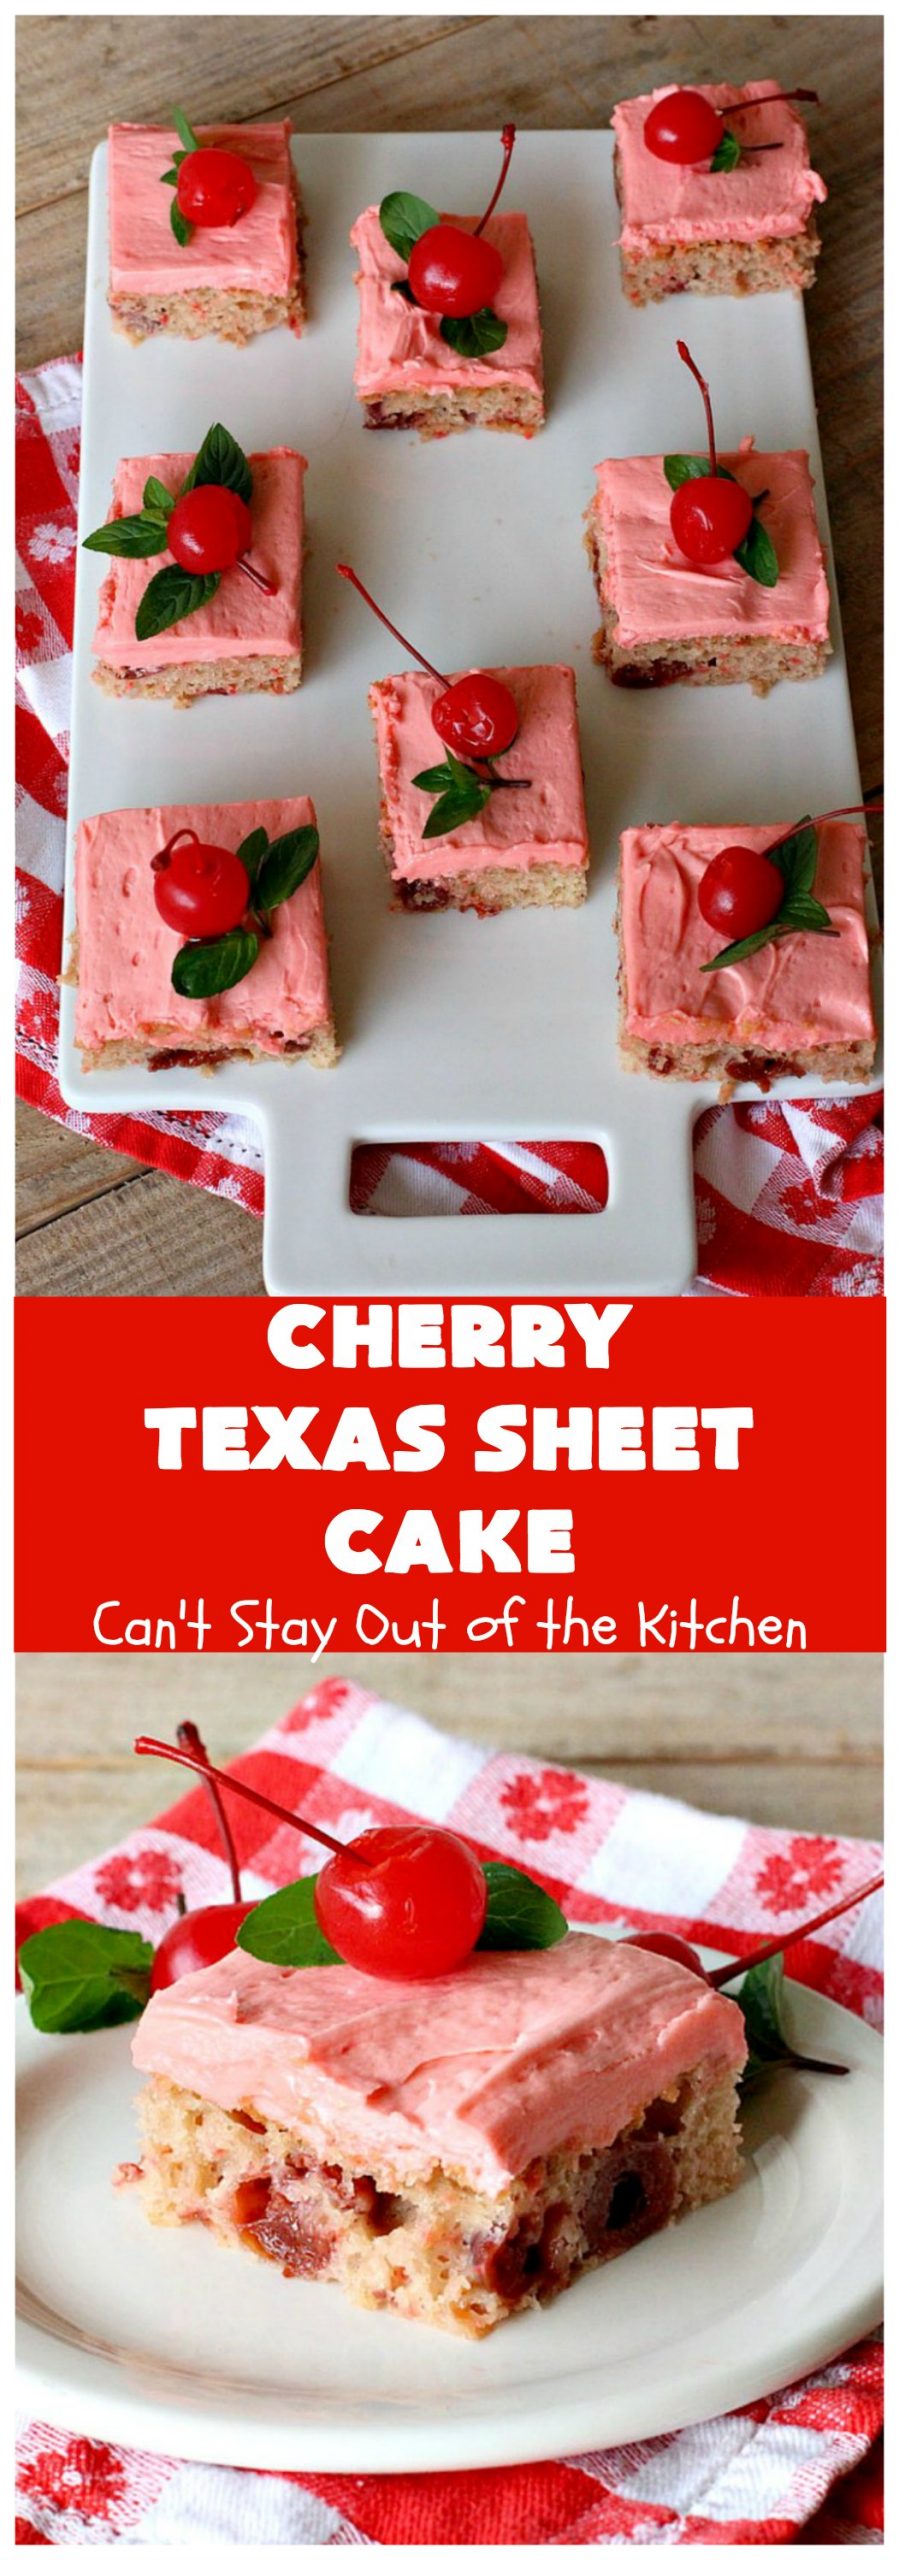 Cherry Texas Sheet Cake | Can't Stay Out of the Kitchen | this luscious #cake will knock your socks off!  This mouthwatering #recipe will feed a crowd so it's great for #holidays or company. The #CreamCheese icing is wonderful. #dessert #HolidayDessert #CherryDessert #TexasSheetCake #CherryTexasSheetCake